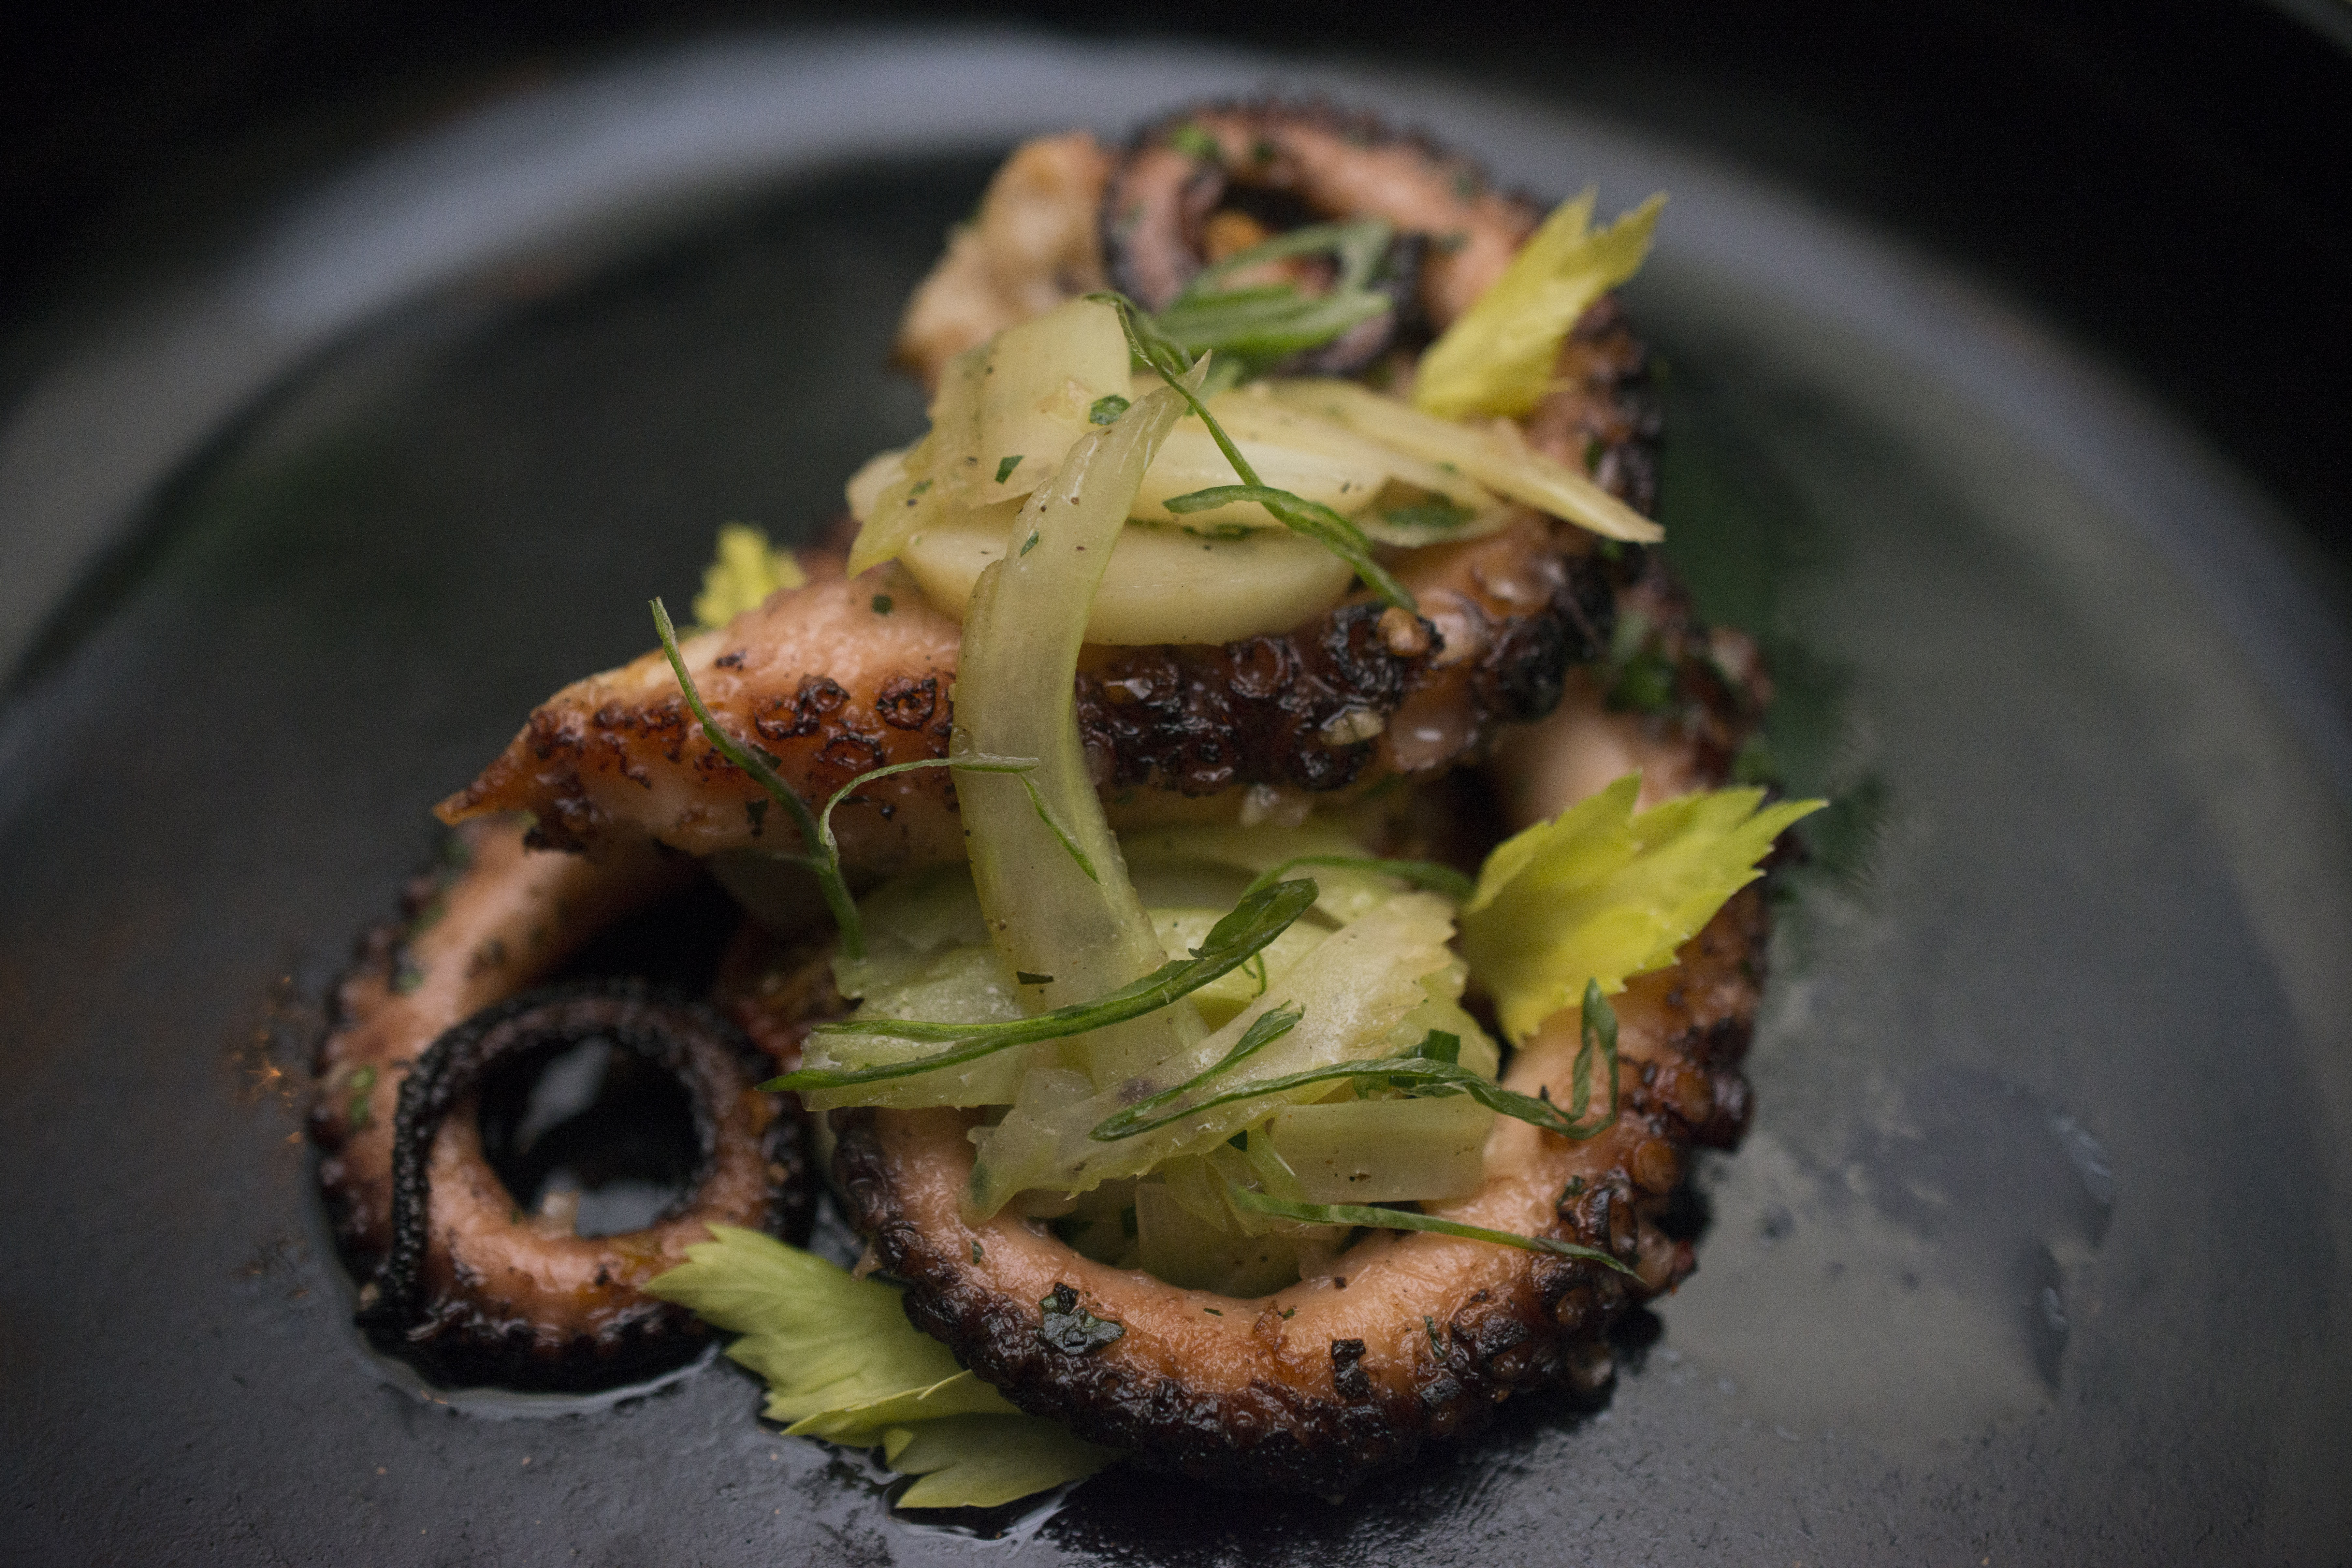 Grilled octopus at The Restaurant